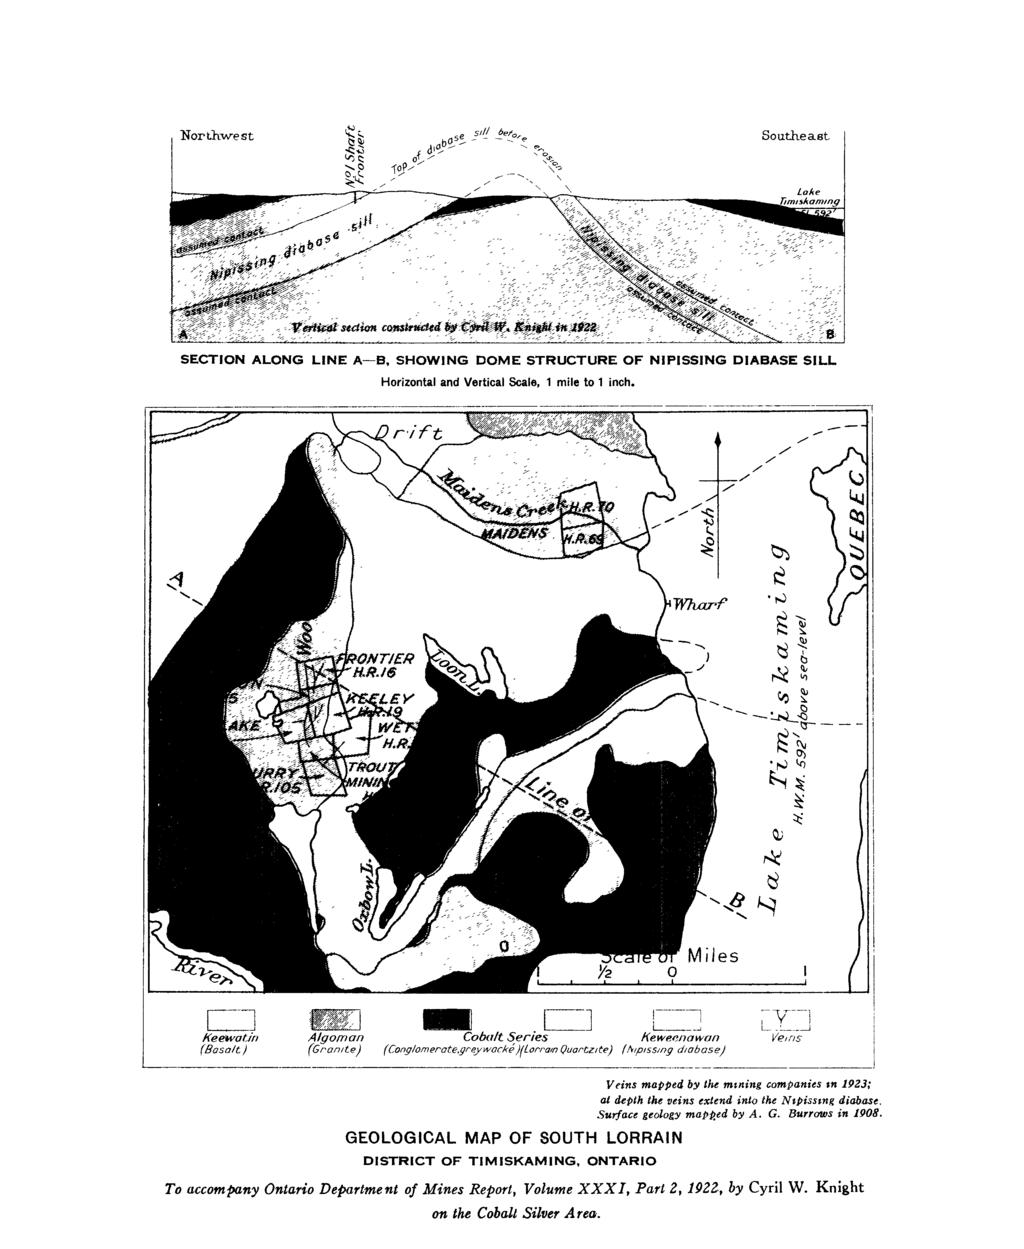 Northwest SECTION ALONG LINE A B, SHOWING DOME STRUCTURE OF NIPISSING DIABASE SILL Horizontal and Vertical Scale, 1 mile to 1 inch. Keewatin Algoman Cobalt.